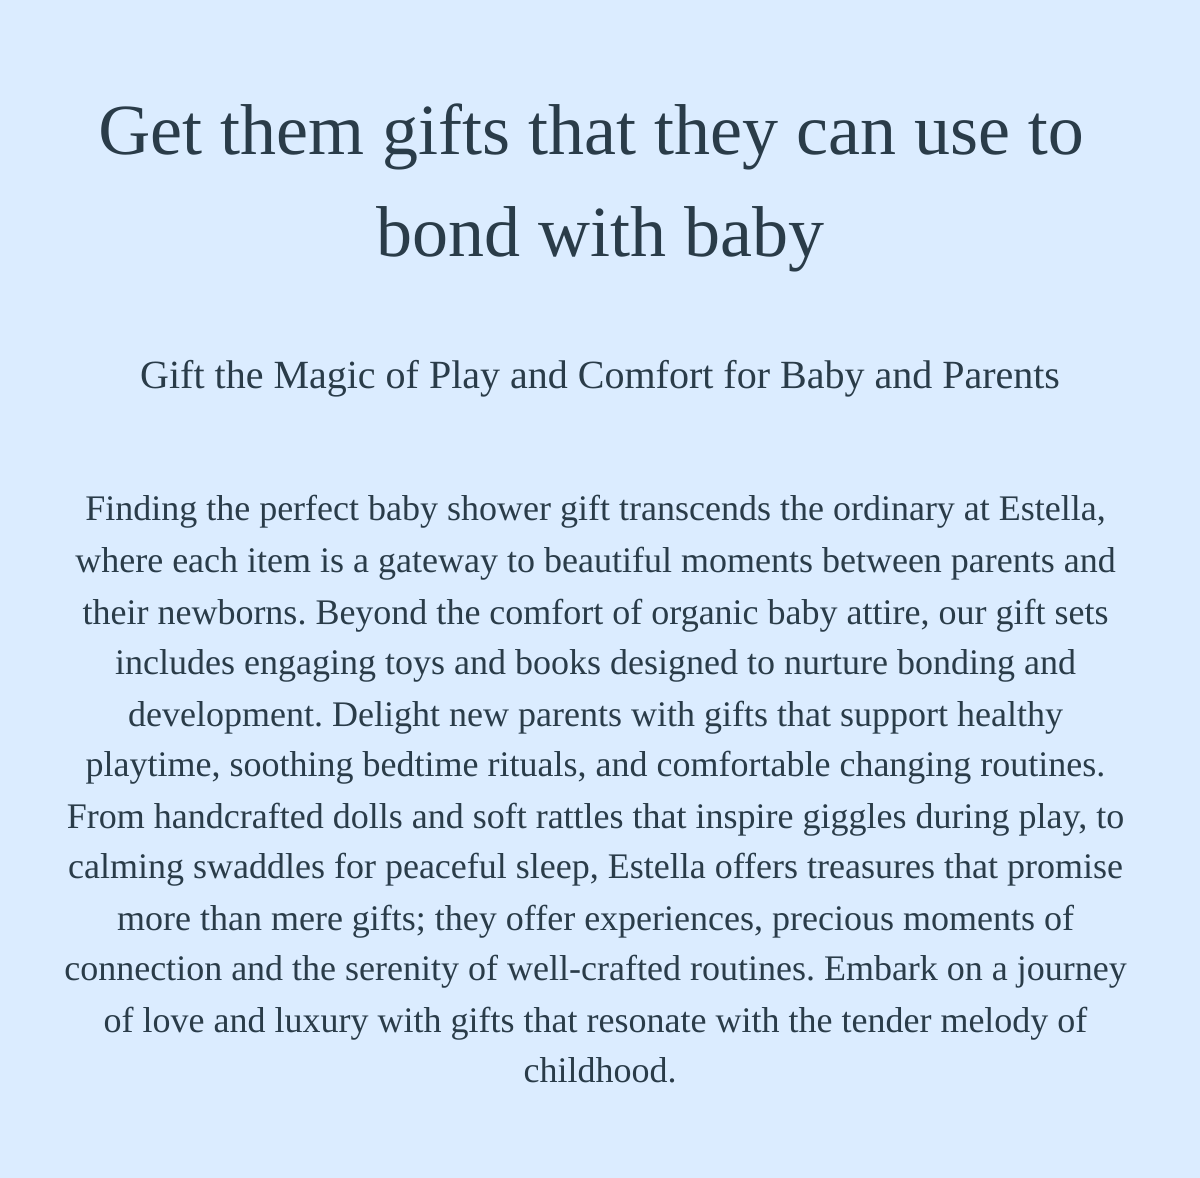  Get them gifts that they can use to bond with baby Gift the Magic of Play and Comfort for Baby and Parents Finding the perfect baby shower gift transcends the ordinary at Estella, where each item is a gateway to beautiful moments between parents and their newborns. Beyond the comfort of organic baby attire, our gift sets includes engaging toys and books designed to nurture bonding and development. Delight new parents with gifts that support healthy playtime, soothing bedtime rituals, and comfortable changing routines. From handcrafted dolls and soft rattles that inspire giggles during play, to calming swaddles for peaceful sleep, Estella offers treasures that promise more than mere gifts; they offer experiences, precious moments of connection and the serenity of well-crafted routines. Embark on a journey of love and luxury with gifts that resonate with the tender melody of childhood. Discover More